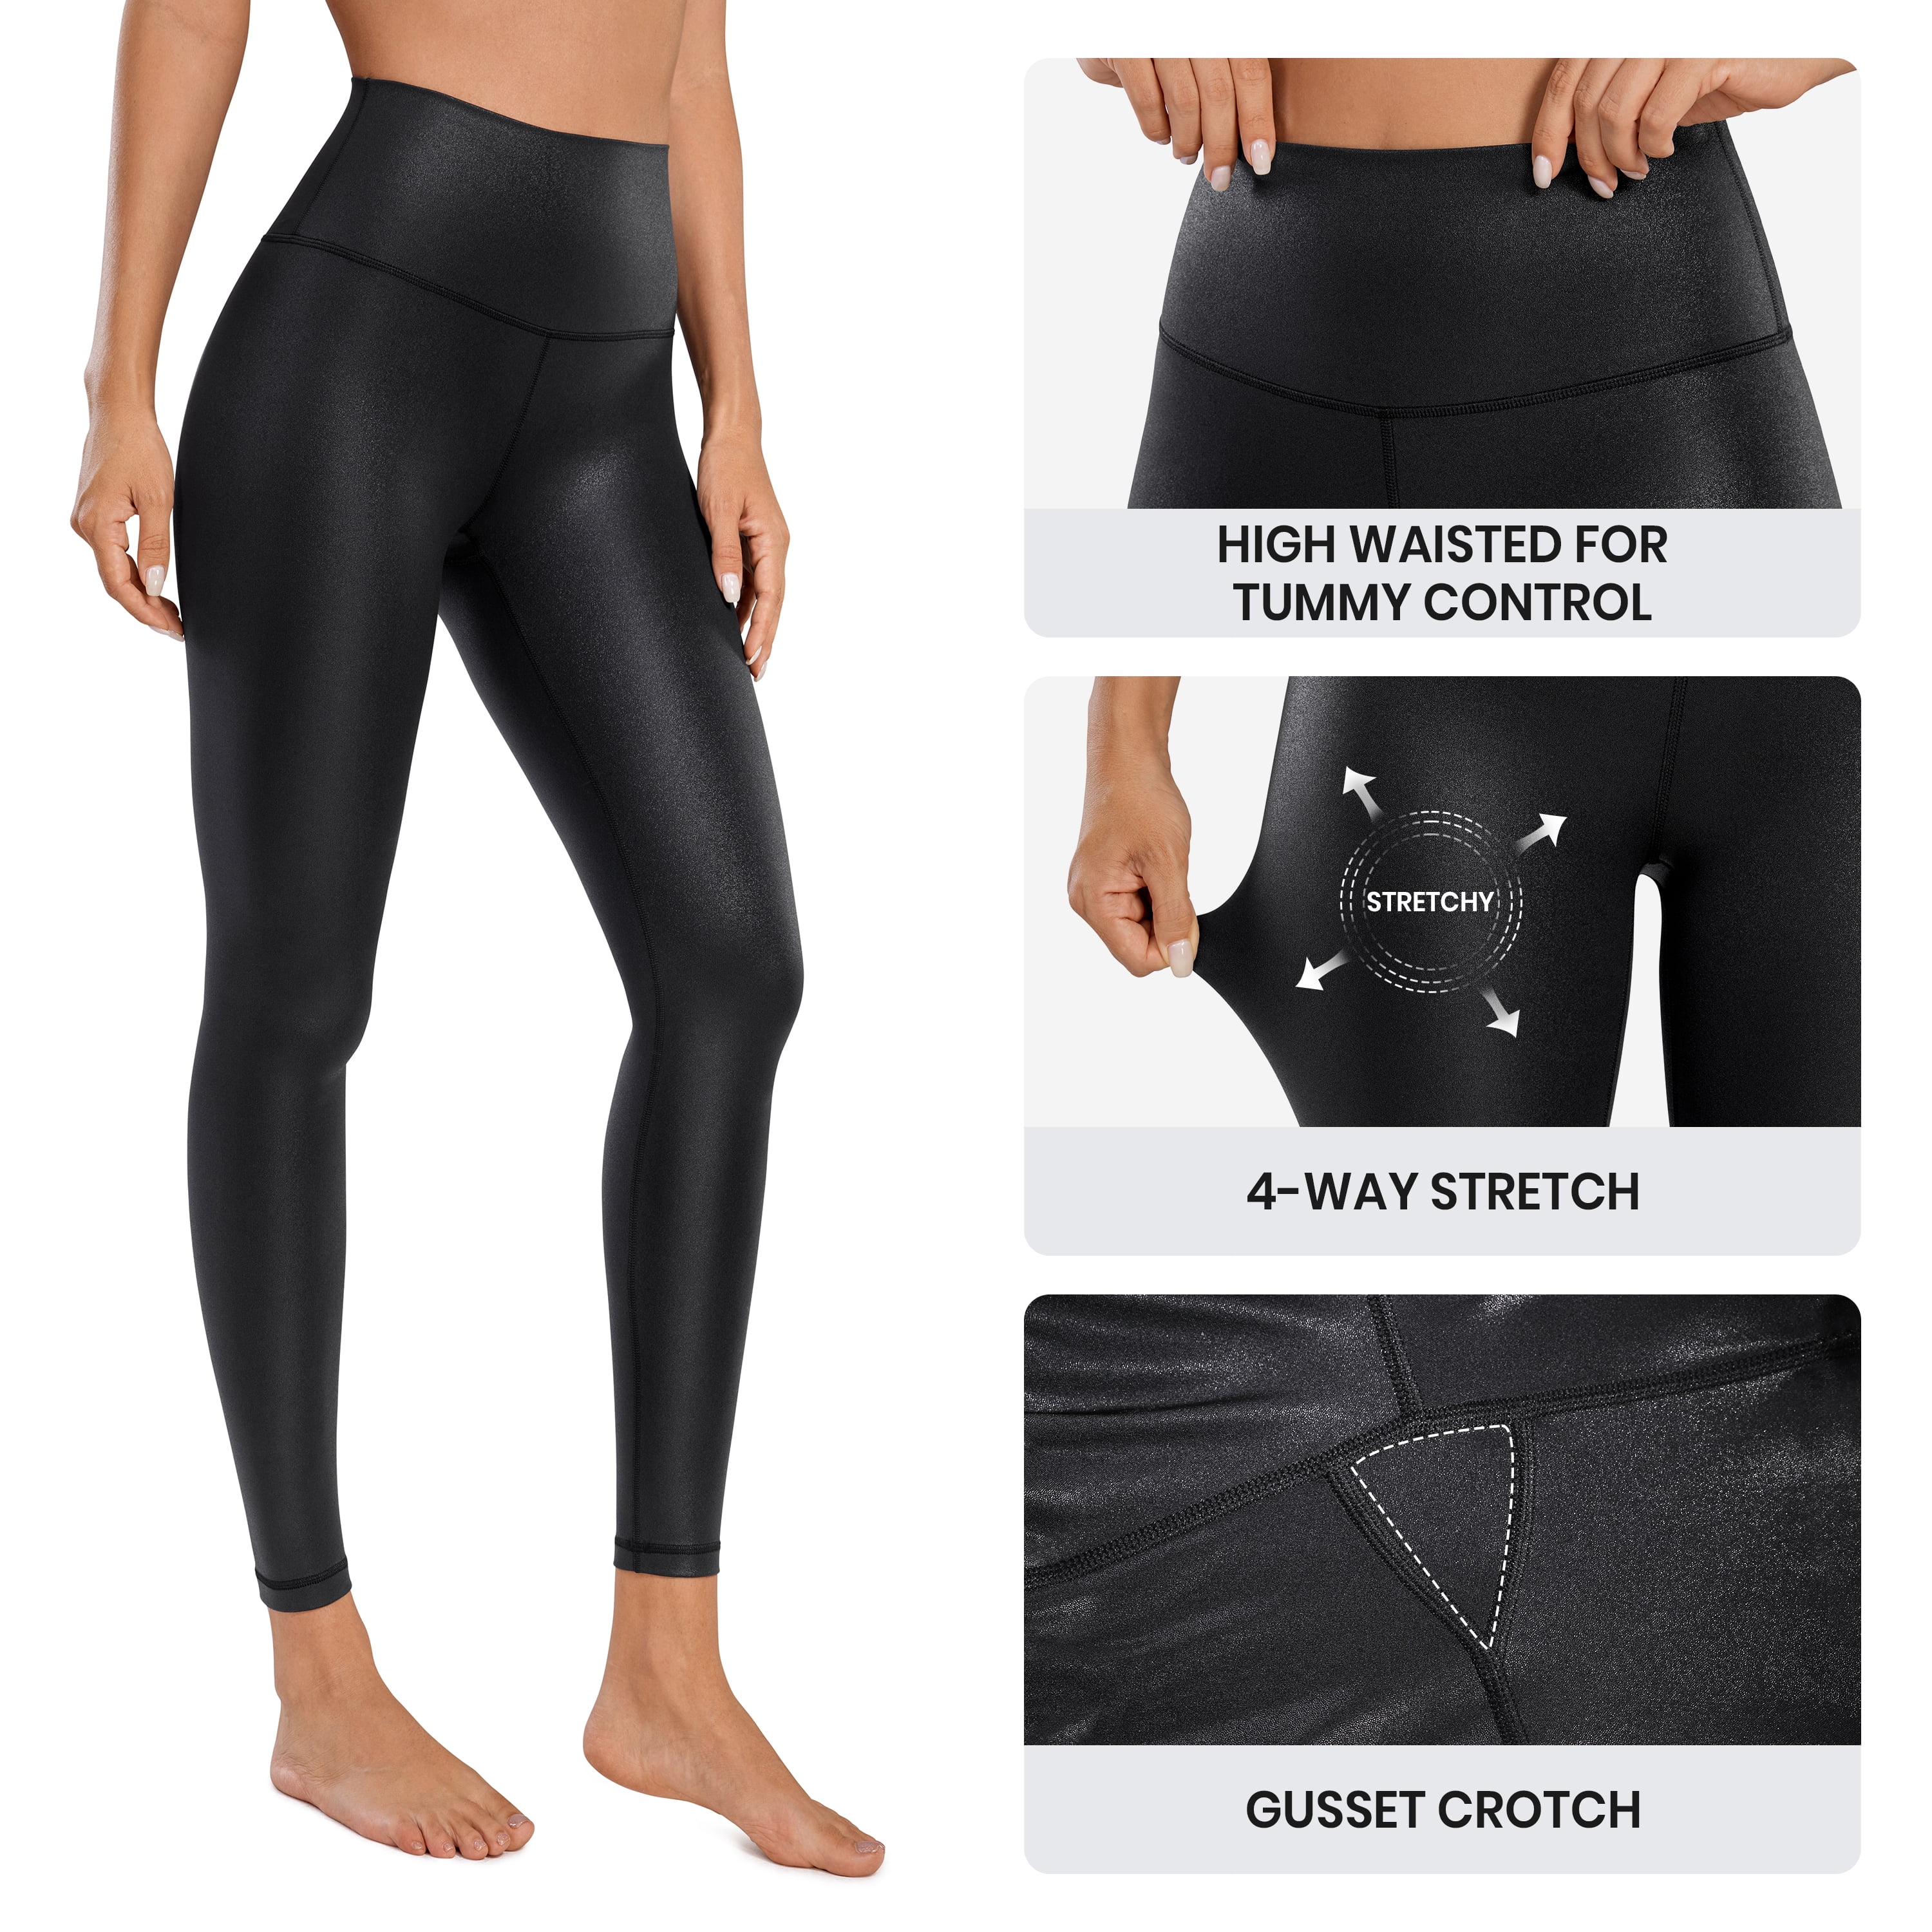  CRZ YOGA Butterluxe Plus Size Leggings for Women 25 Inches -  High Waisted Buttery Soft Workout Spandex Yoga Pants 3X 4X Faux Leather  Black 1X : Clothing, Shoes & Jewelry